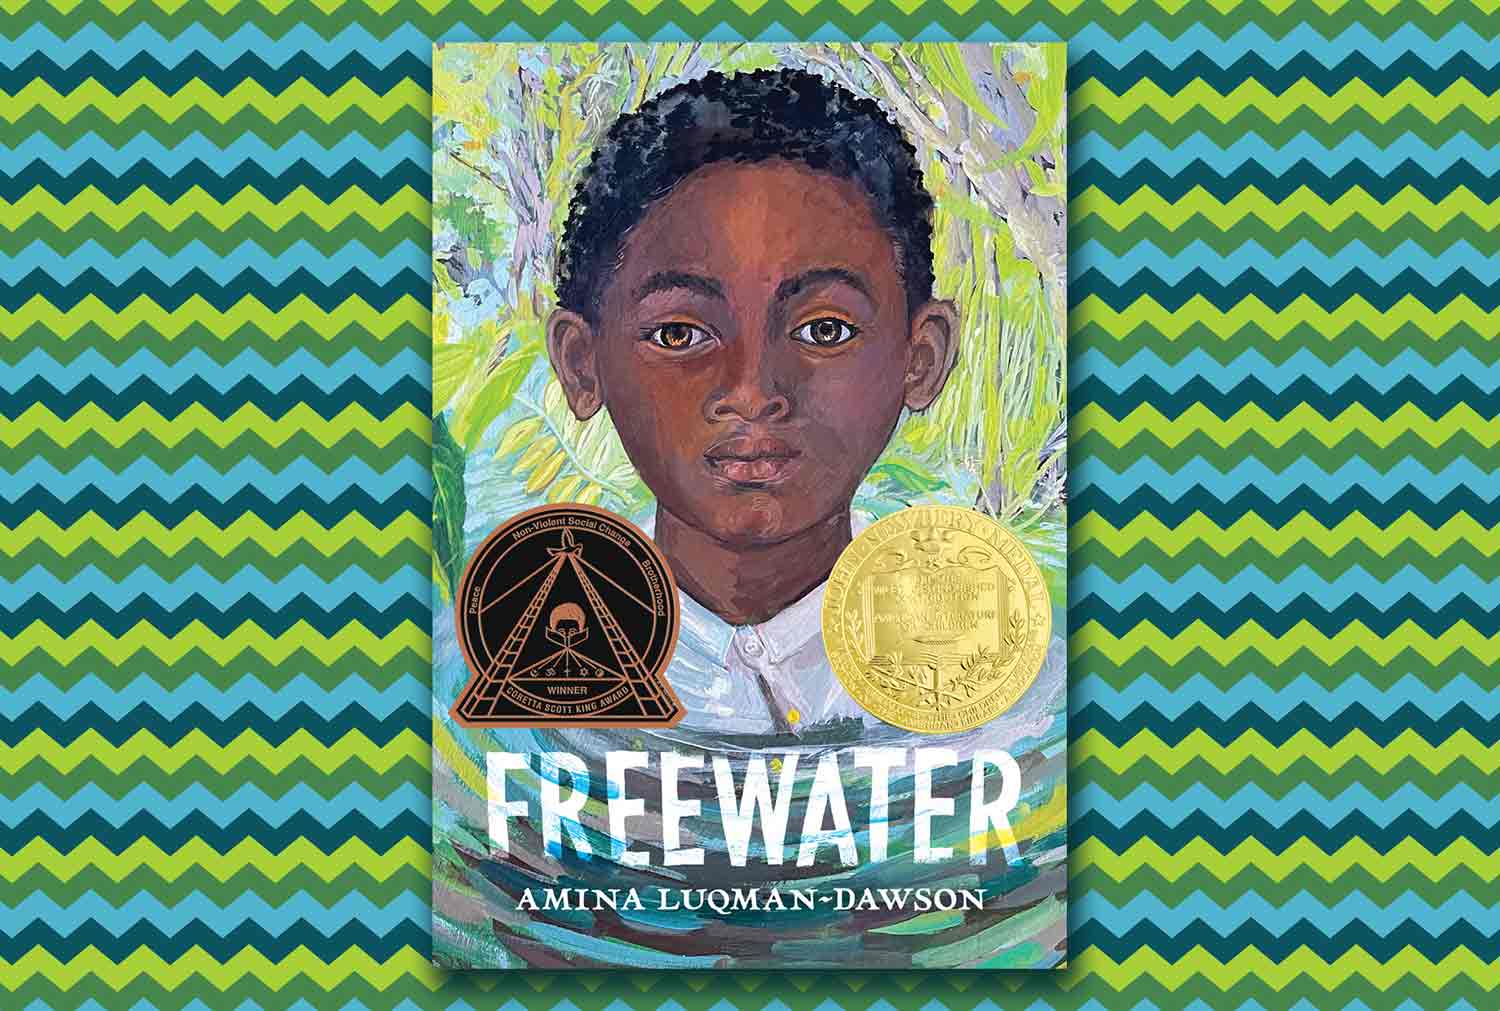 Freewater book cover with Newbery Medal shows a young boy in swamp water